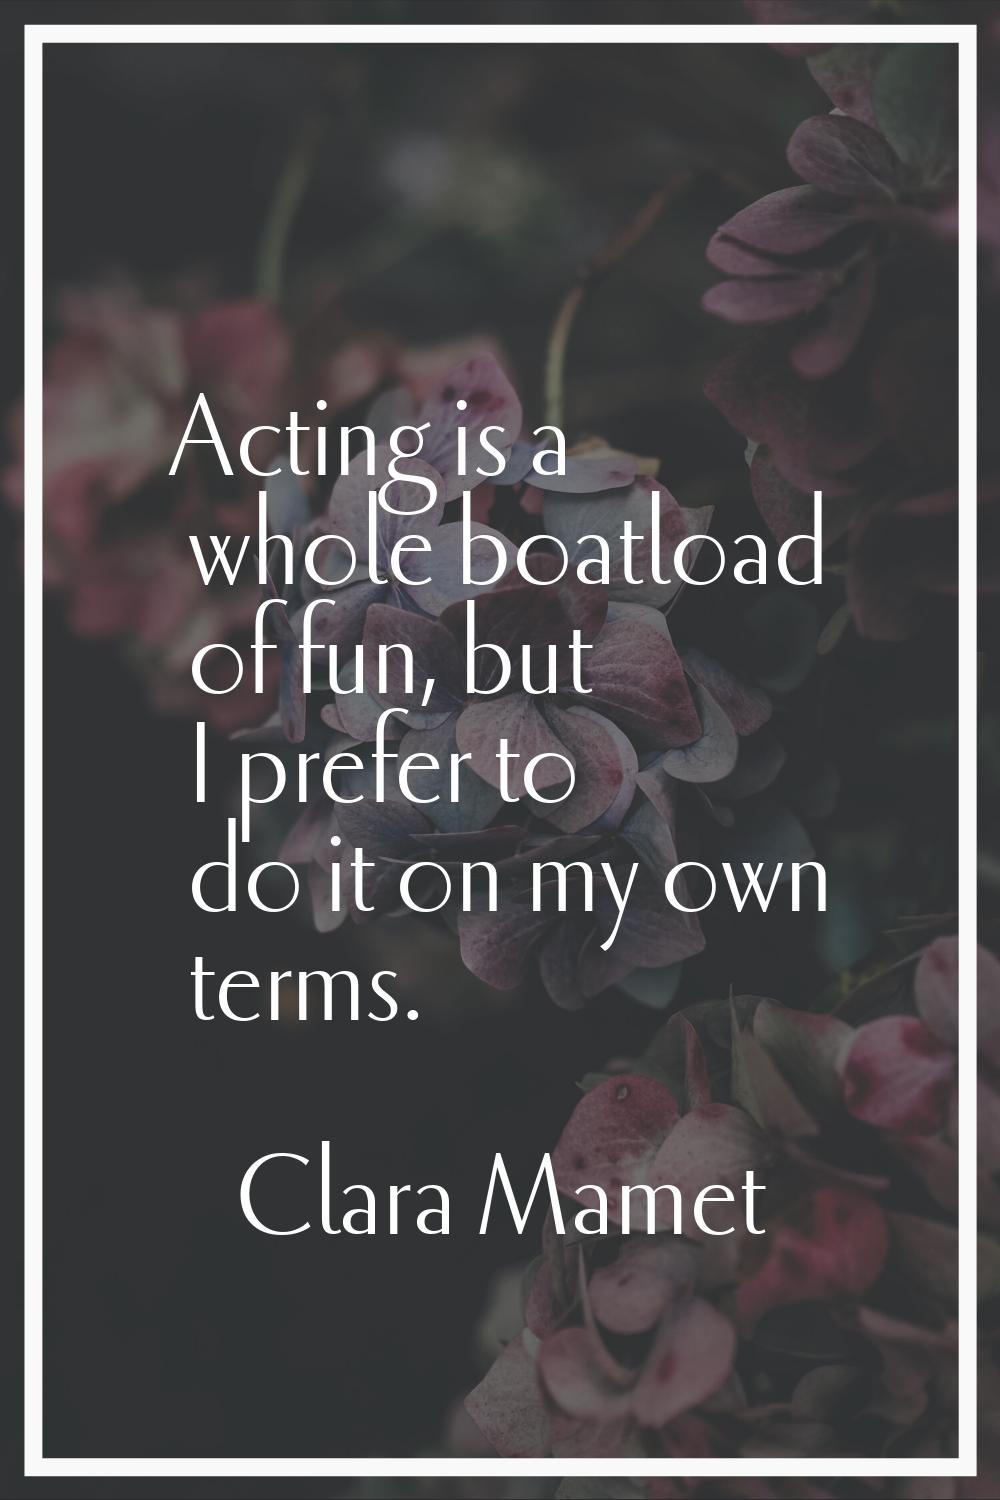 Acting is a whole boatload of fun, but I prefer to do it on my own terms.